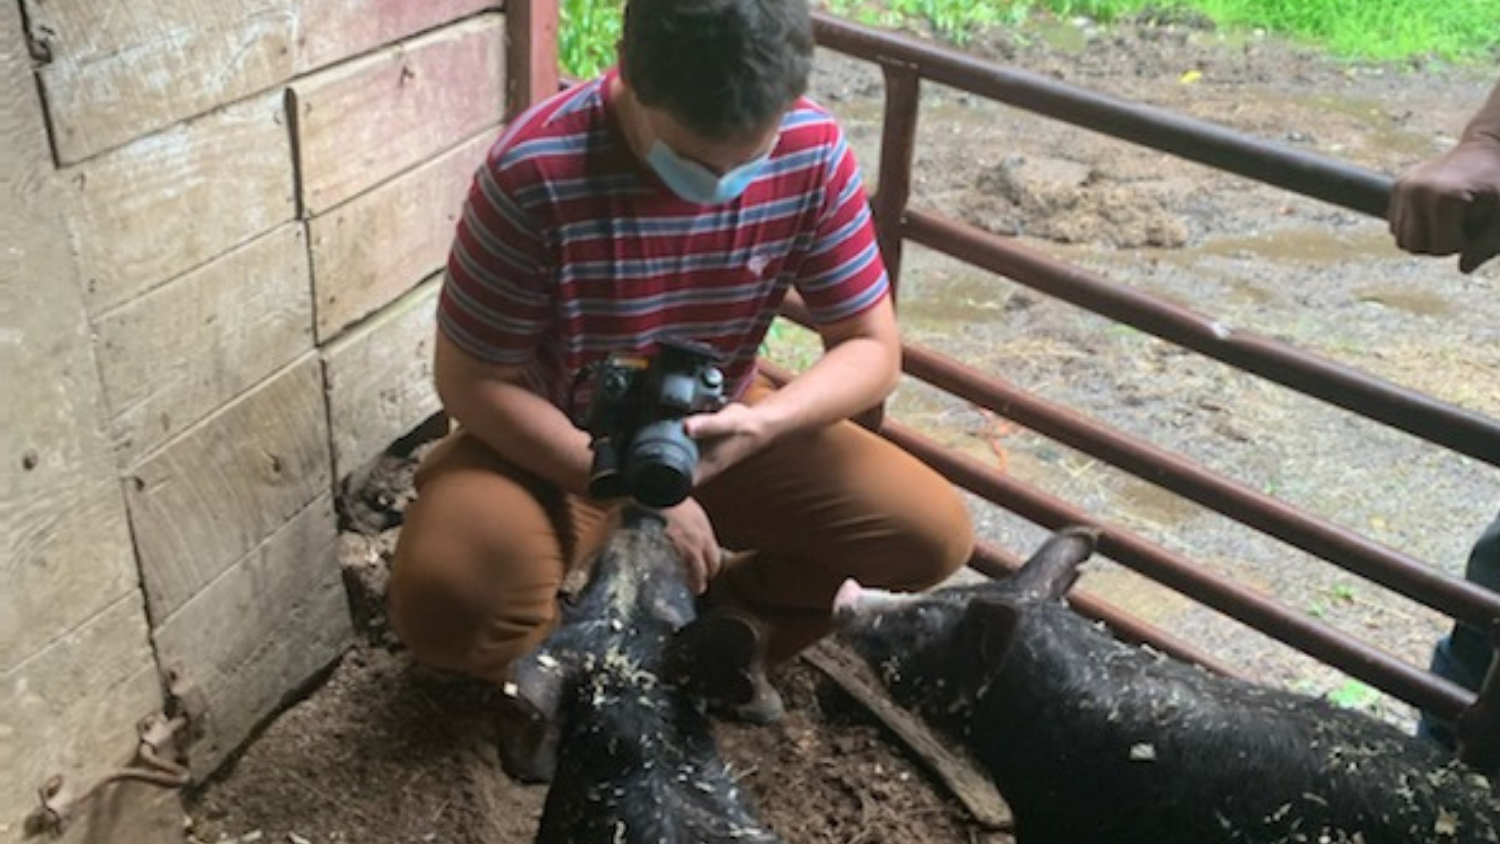 Camera person with pigs